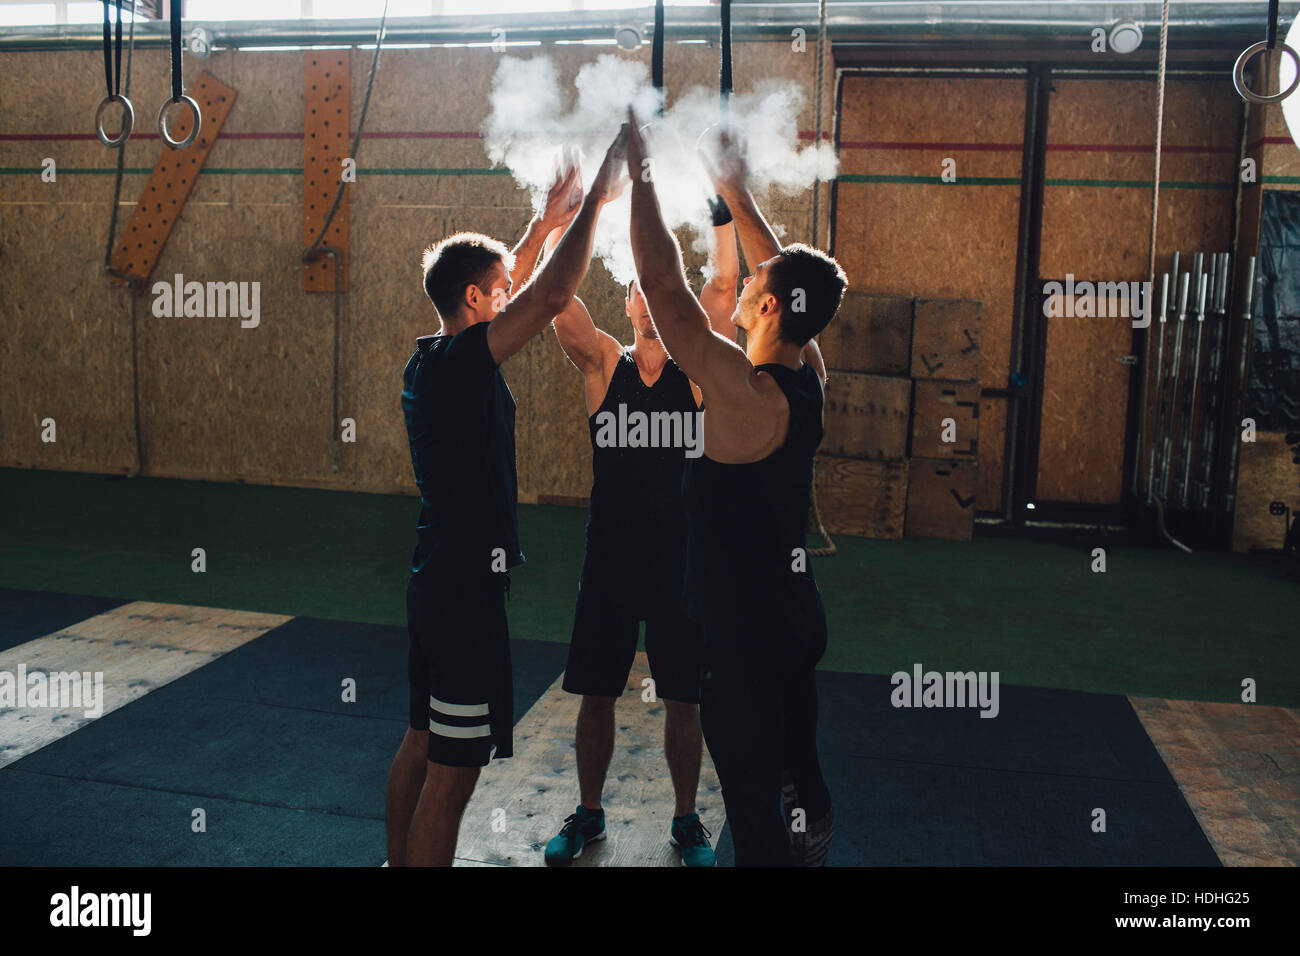 Determined sportsmen dusting sports chalk together at gym Stock Photo